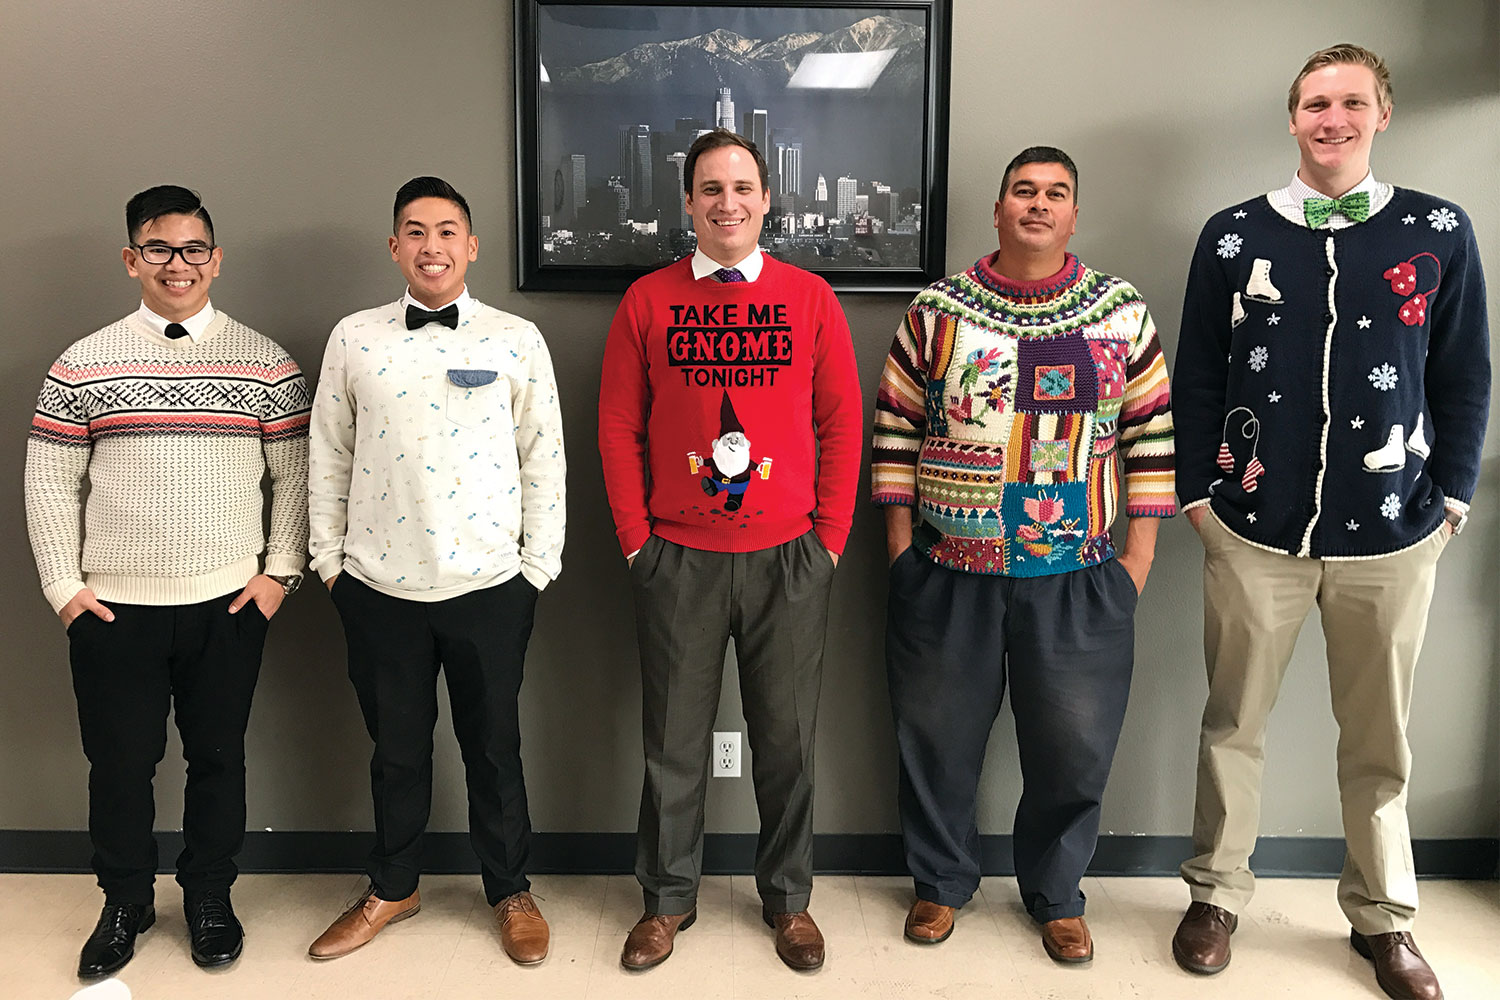 Five members of the sales team smiling and wearing their holiday sweaters.